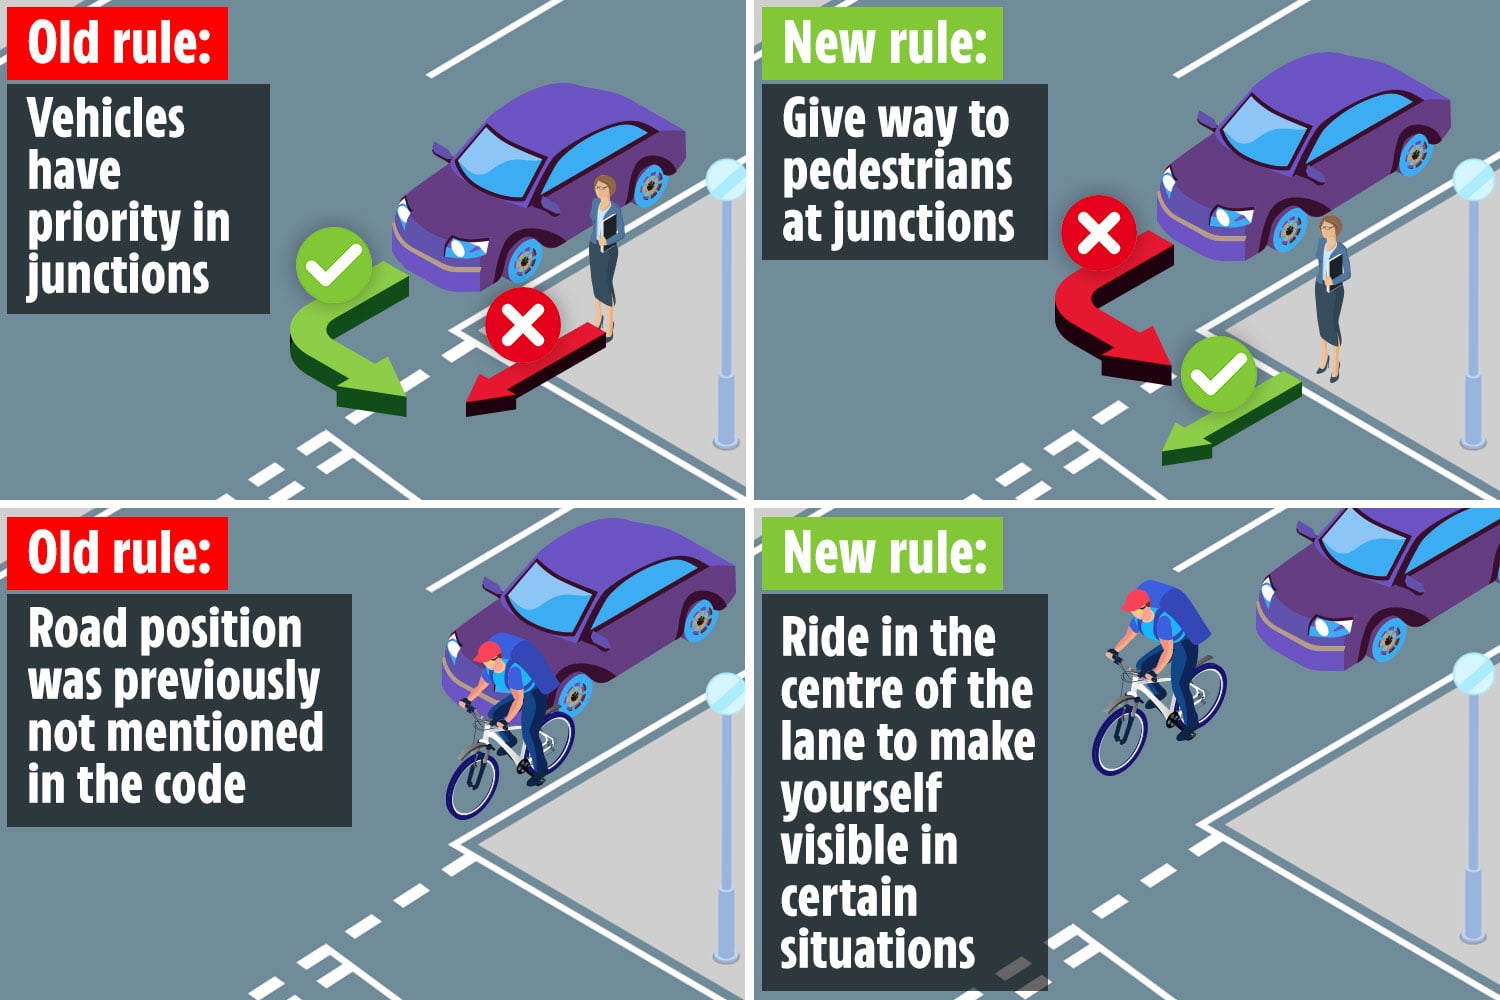 There are changes to the Highway Code that come into effect on January 29.